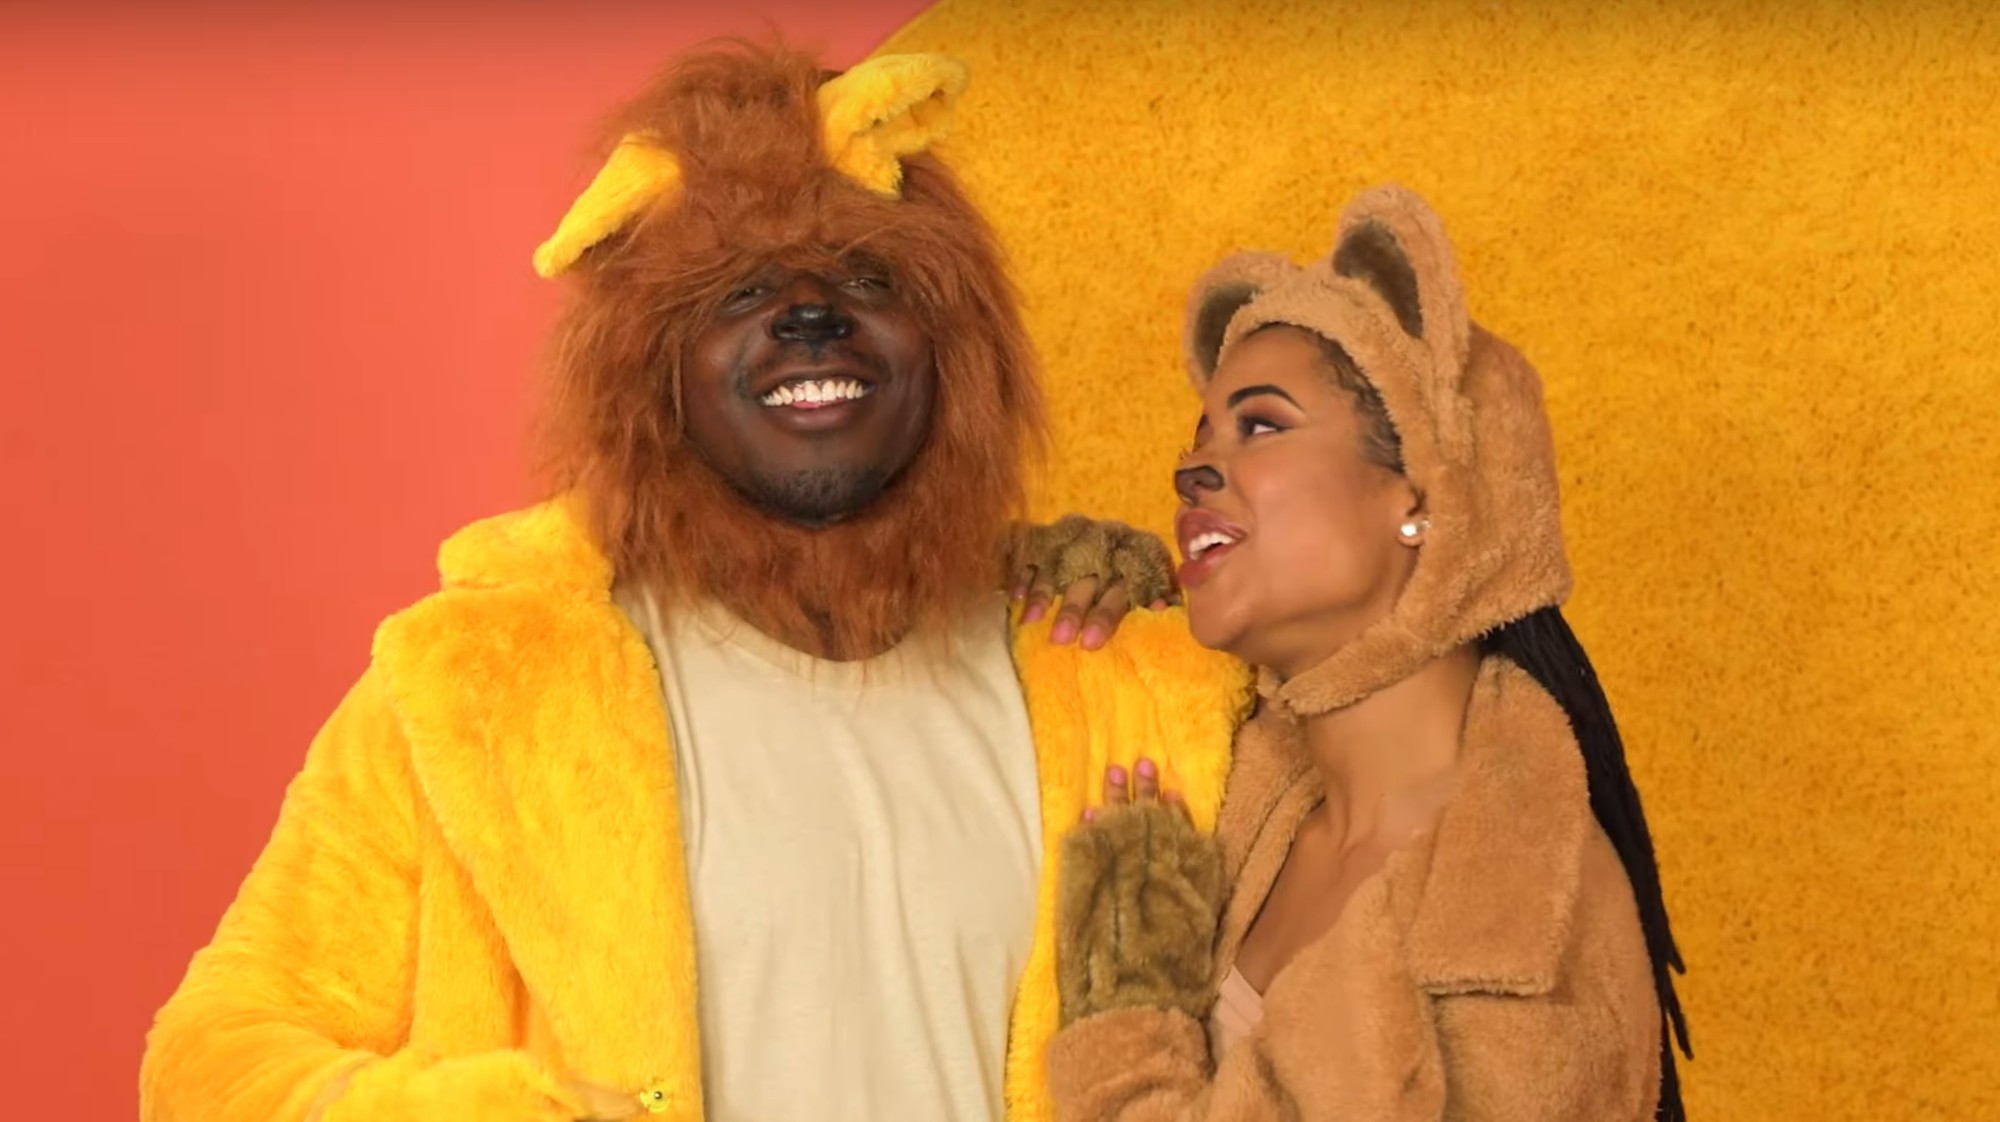 A 'Lion King' Porn Parody Exists and We Can Feel the Love - VICE